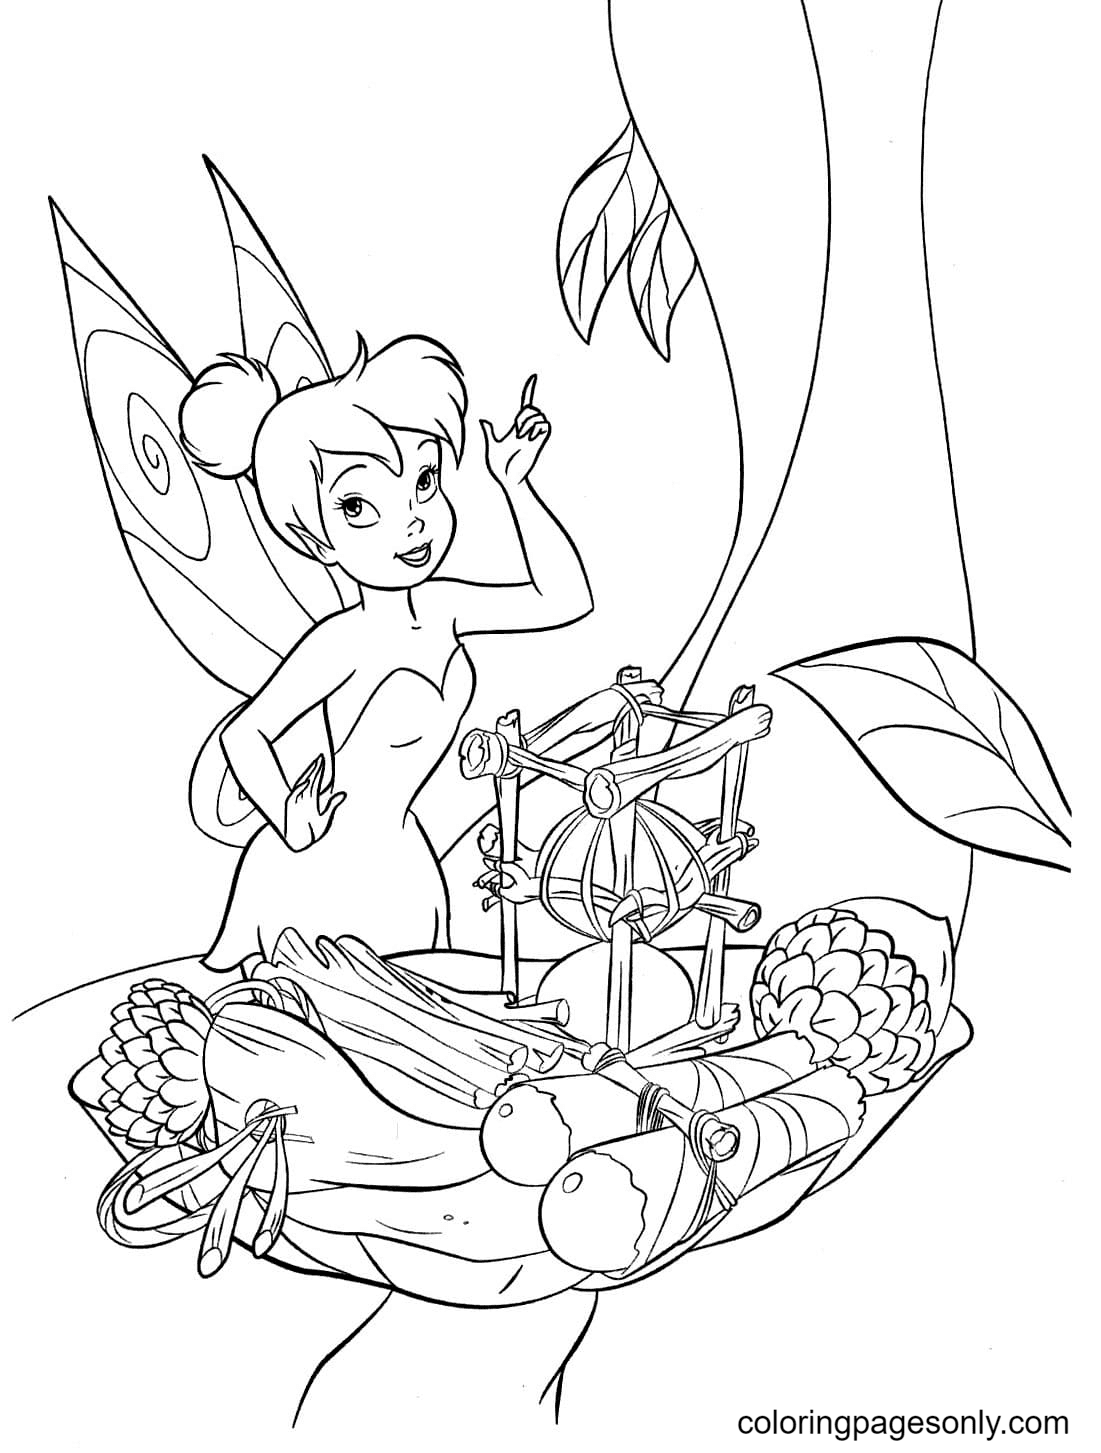 Fairy Tinkerbell Coloring Page